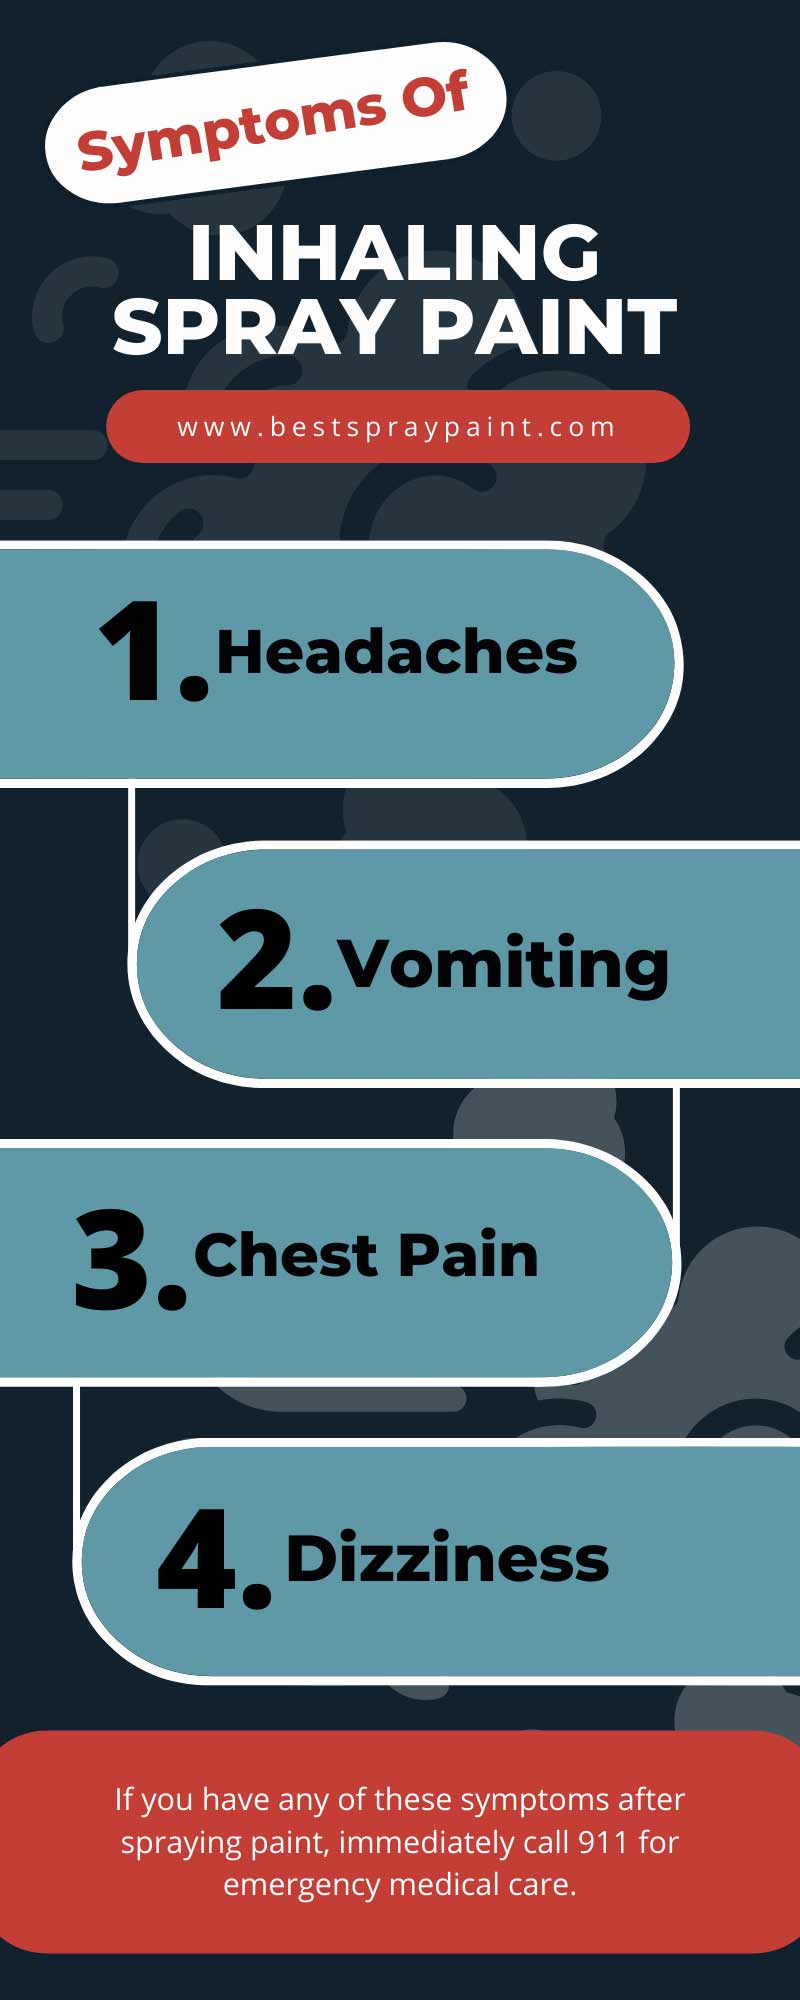 infographic showing the symptoms of inhaling spray paint